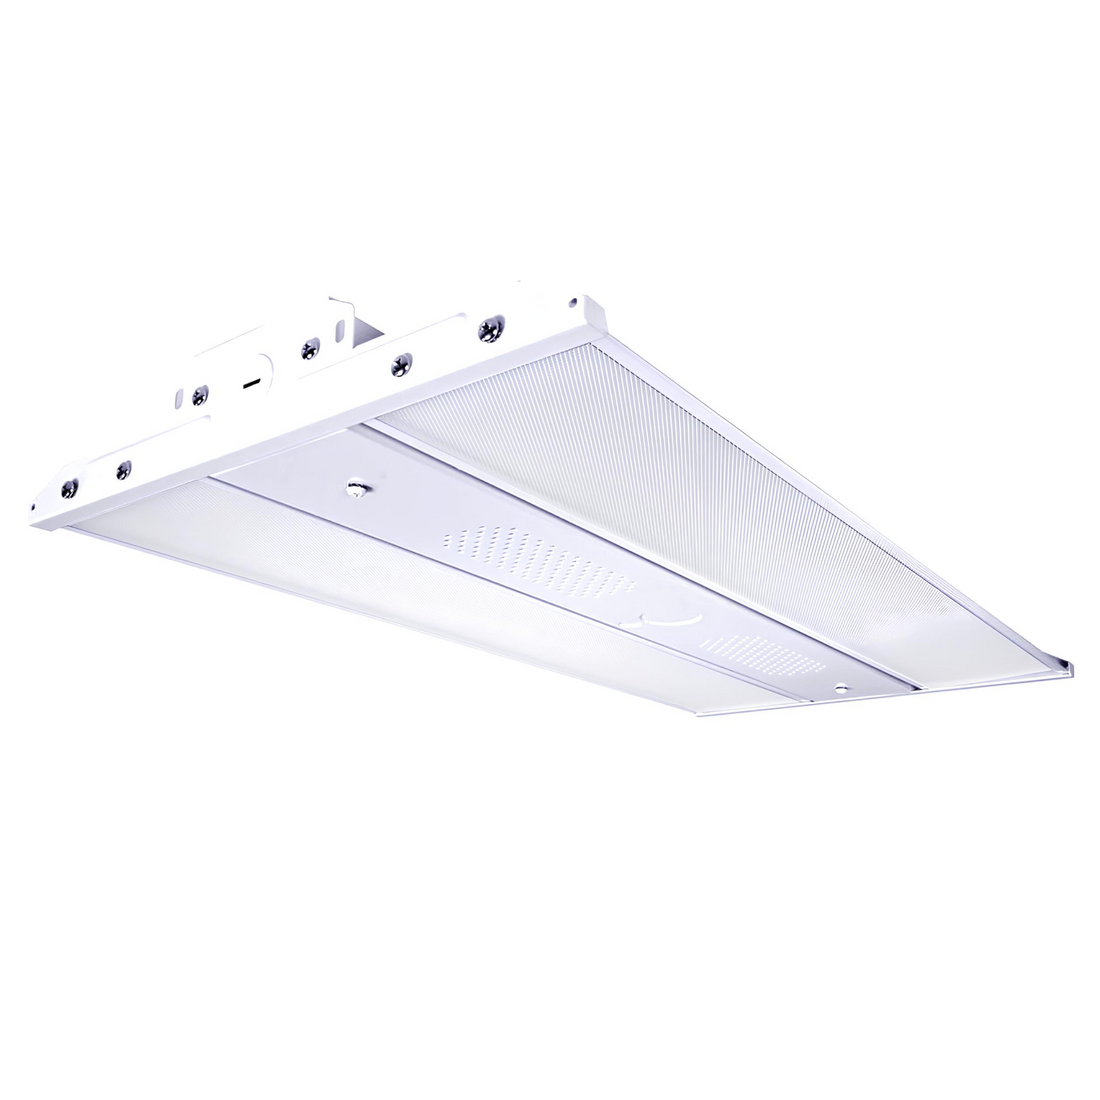 LED Linear High Bay Light - 160W - 5000K- 120-277VAC - 24000 Lumens - 0-10V Dimmable - UL Listed - DLC Premium Listed - 5 Years Warranty - 2-Pack